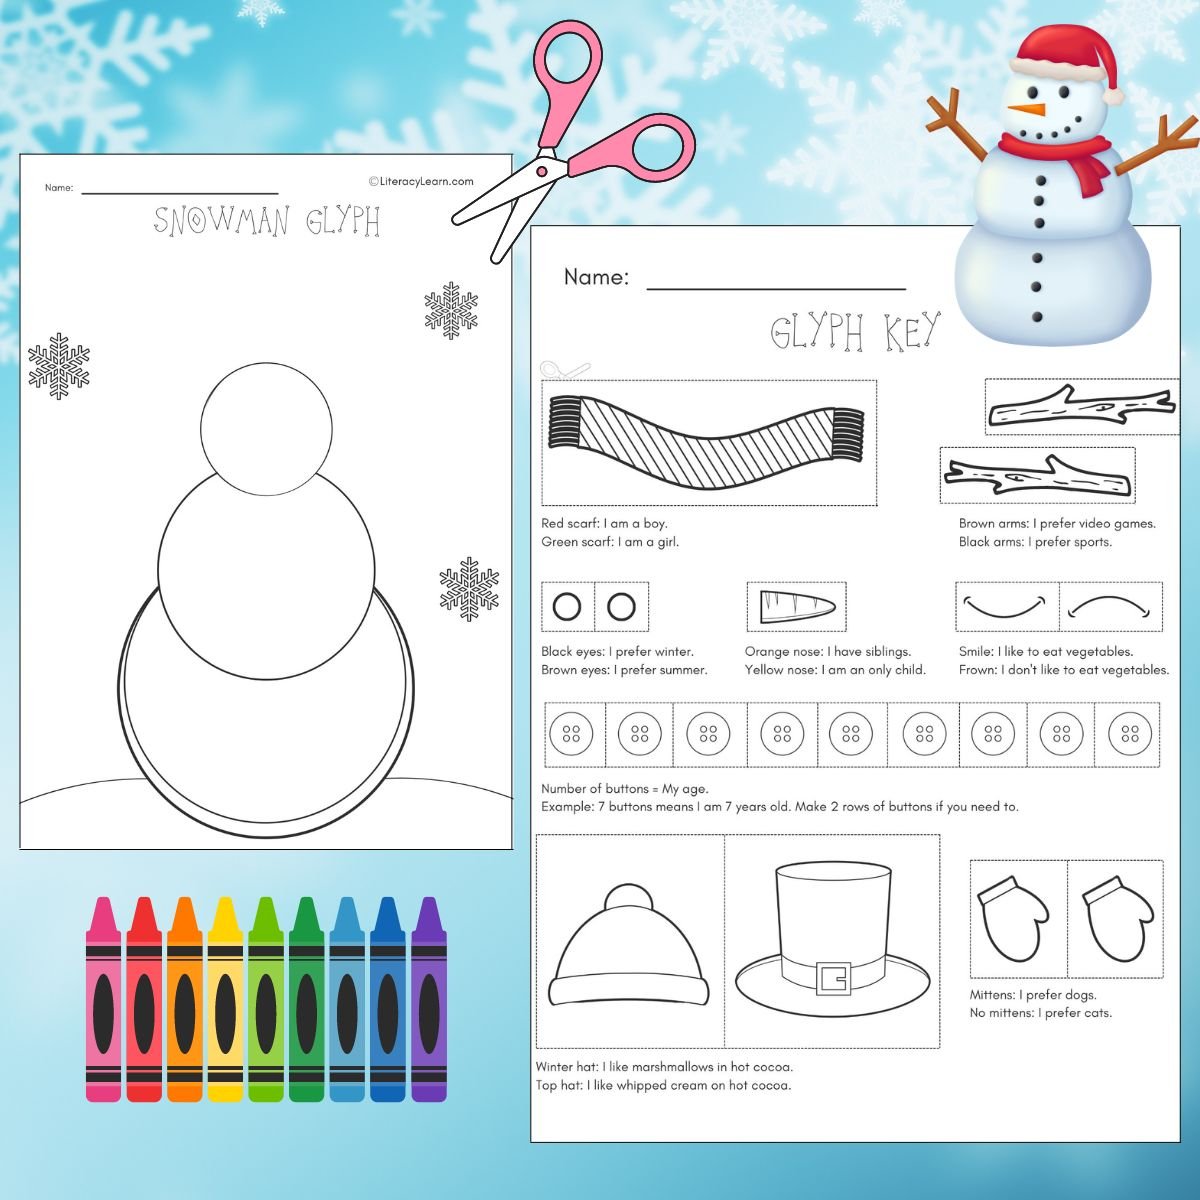 Graphic with a printable snowman glyph and glyph key with crayons and scissors.